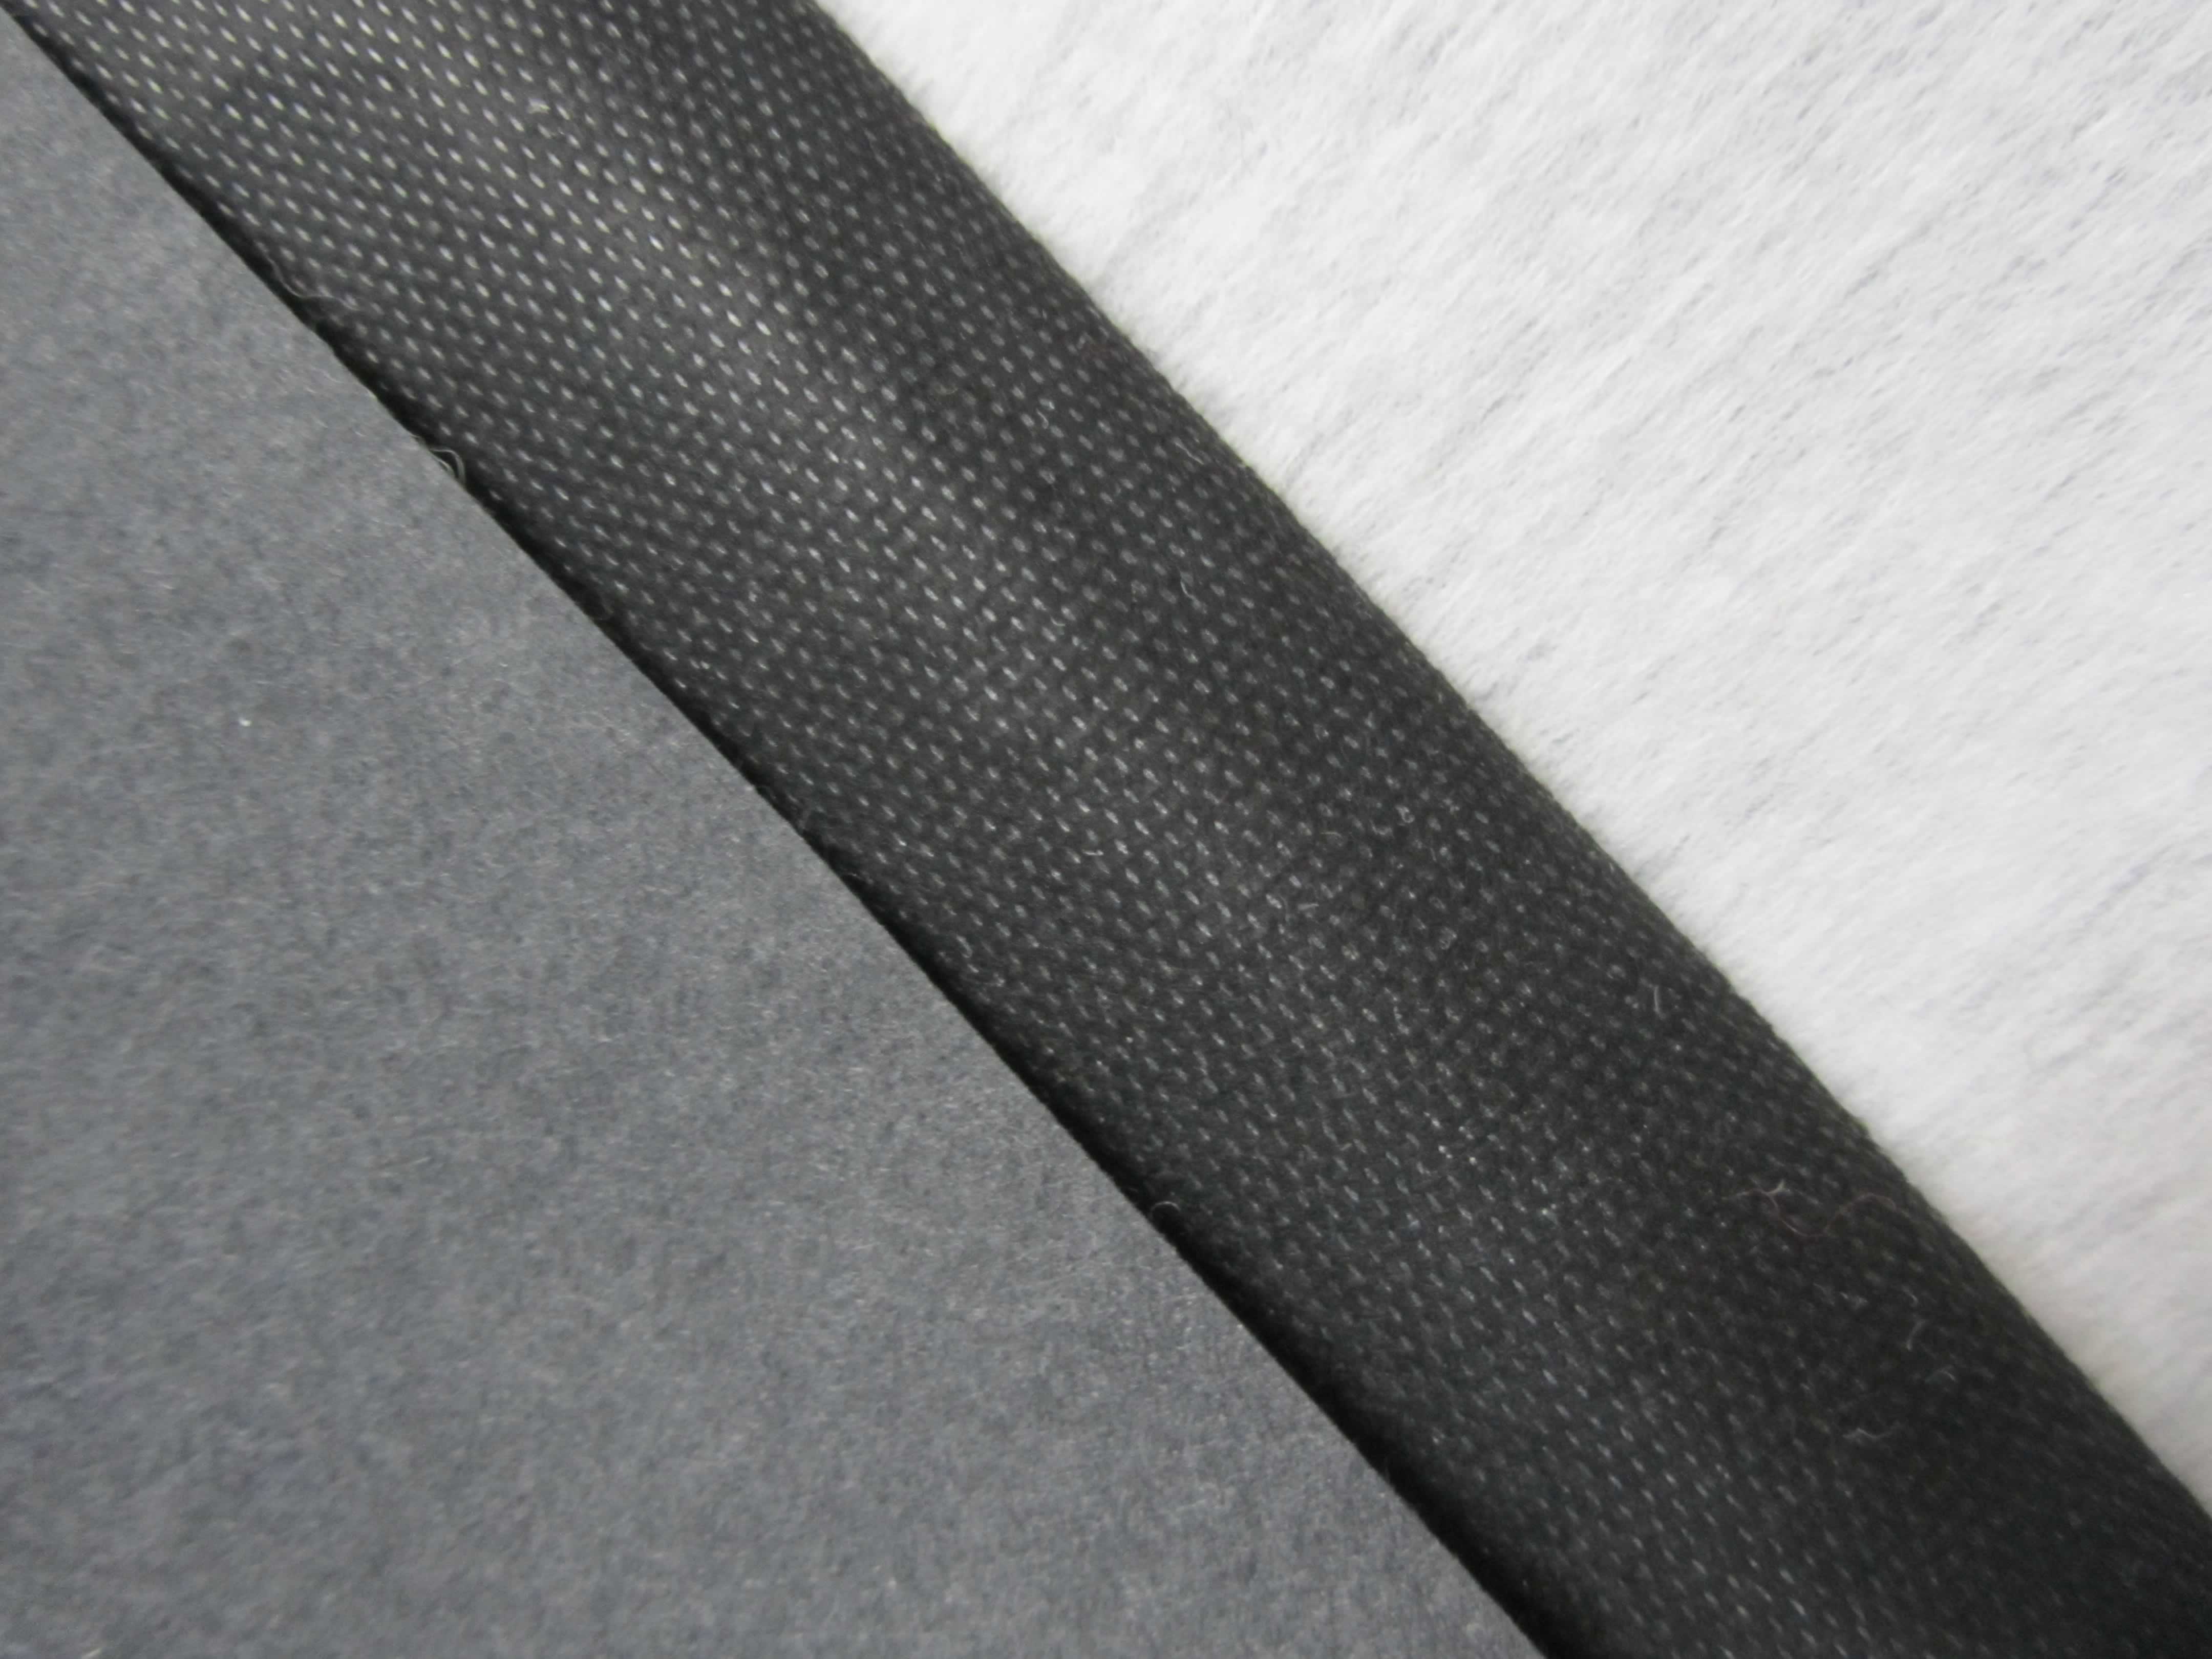 Examples of other nonwoven materials